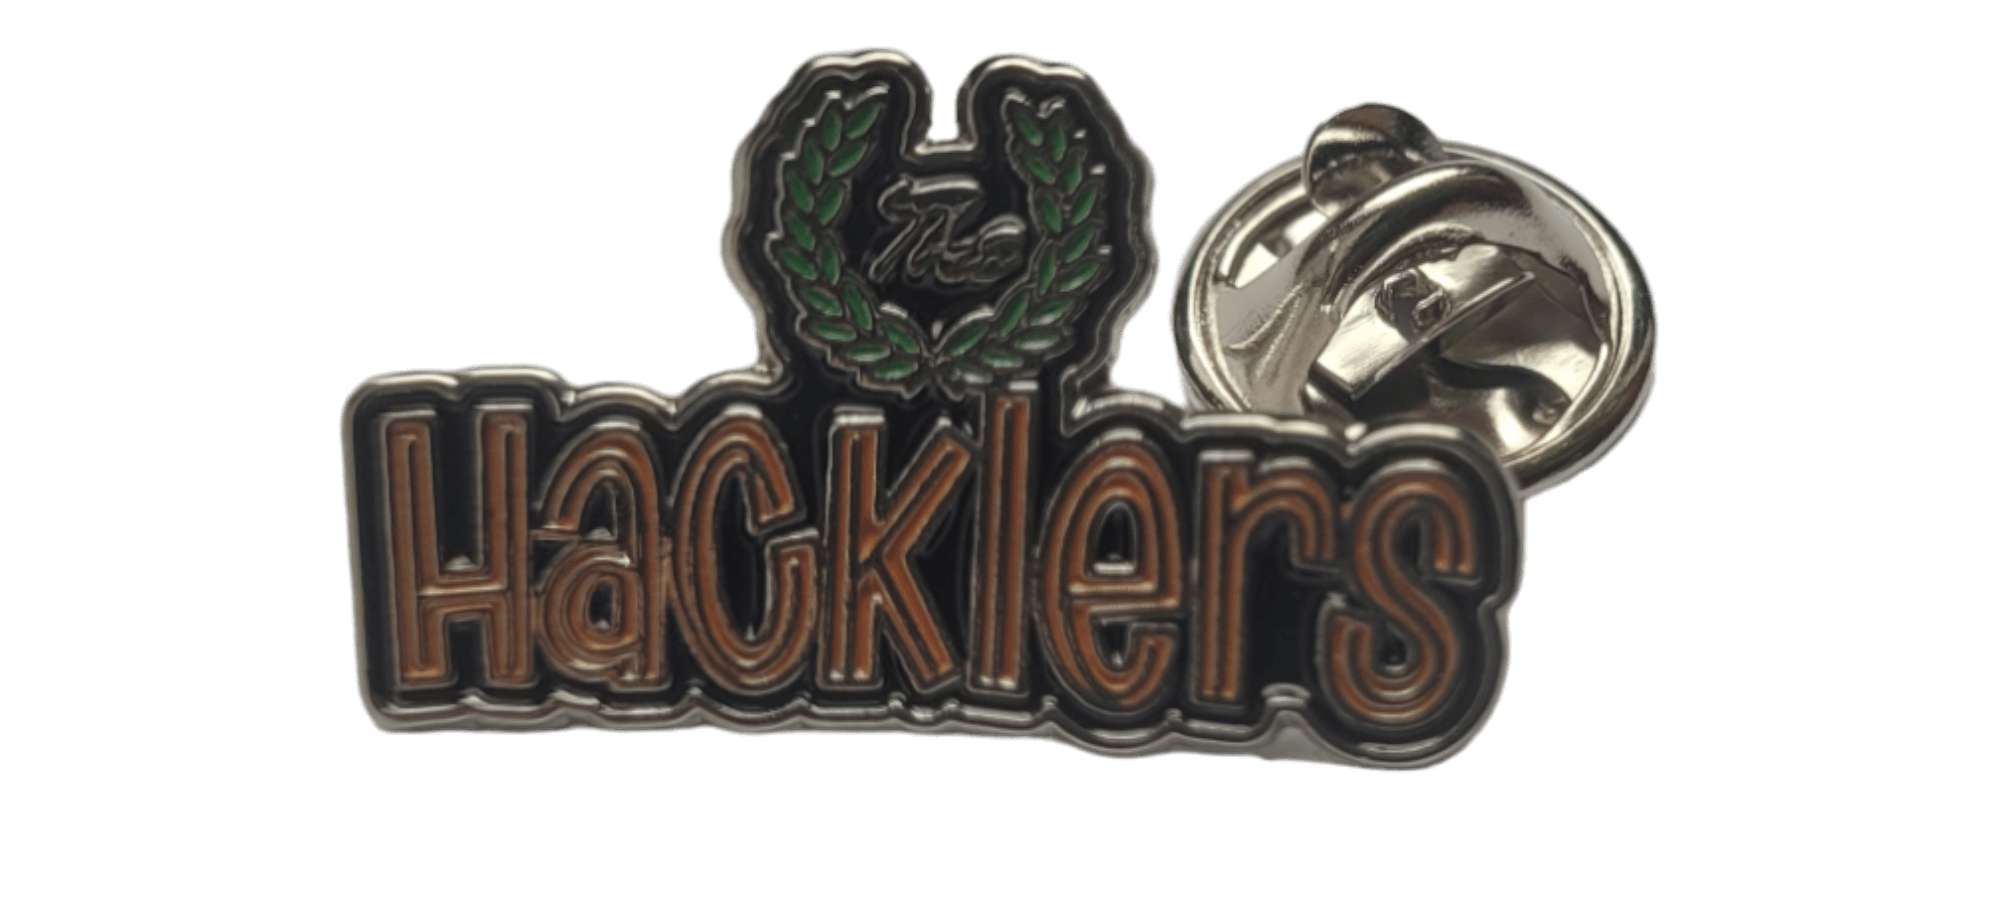 Pin – The Hacklers – Logo